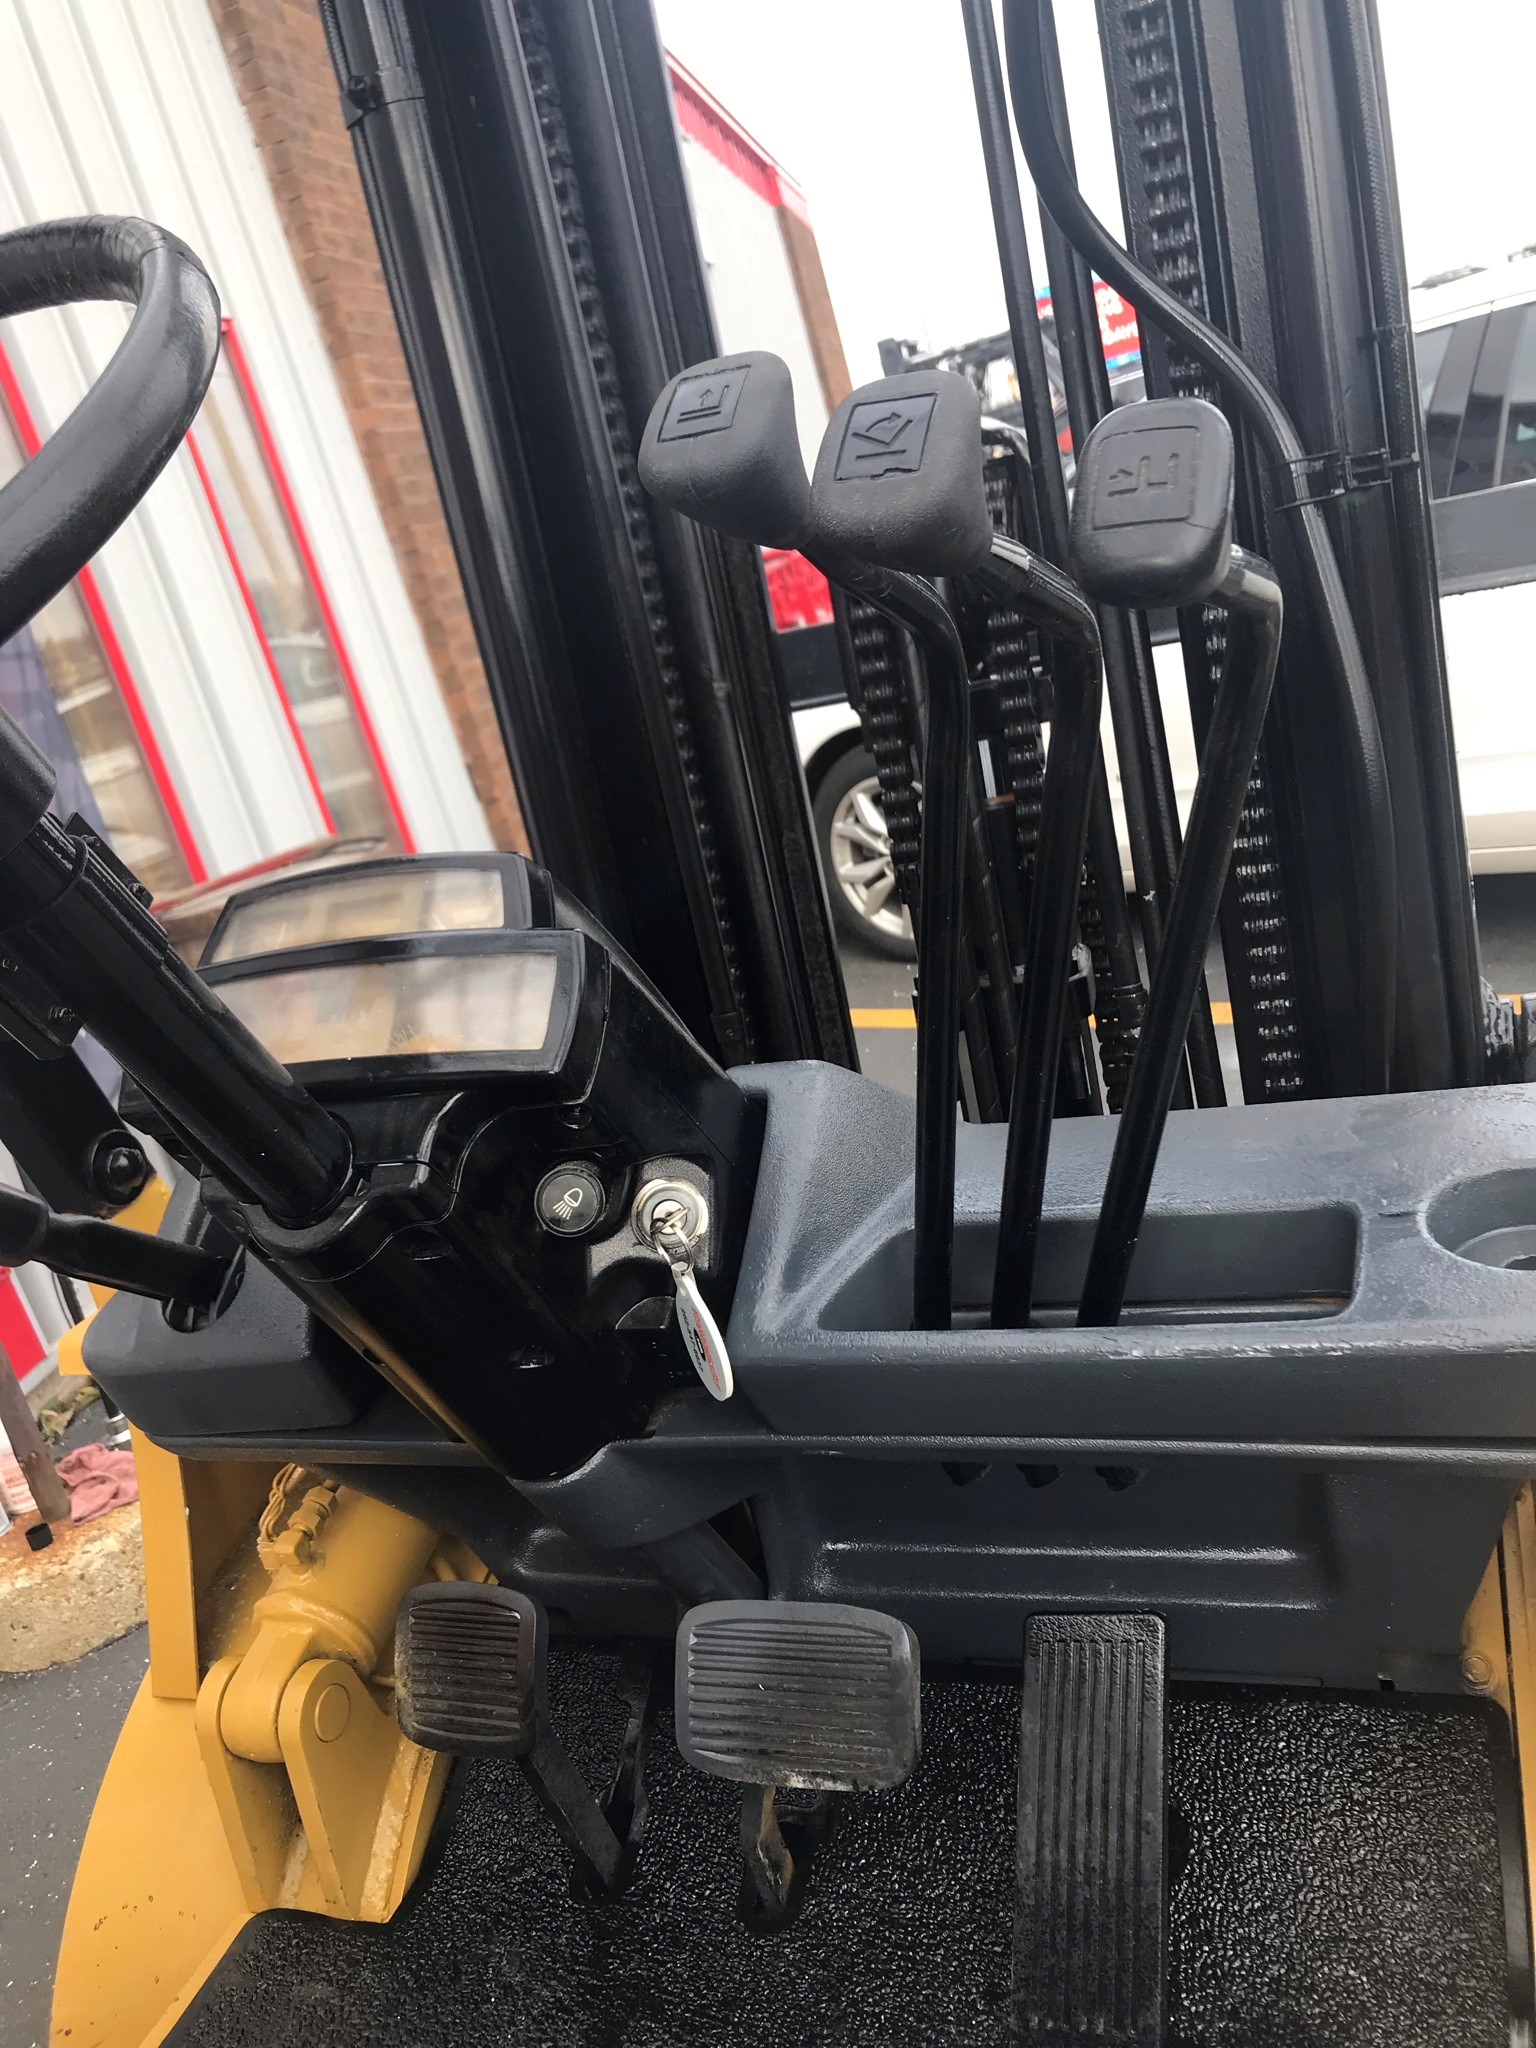 Yellow caterpillar forklift with side shifter for sale